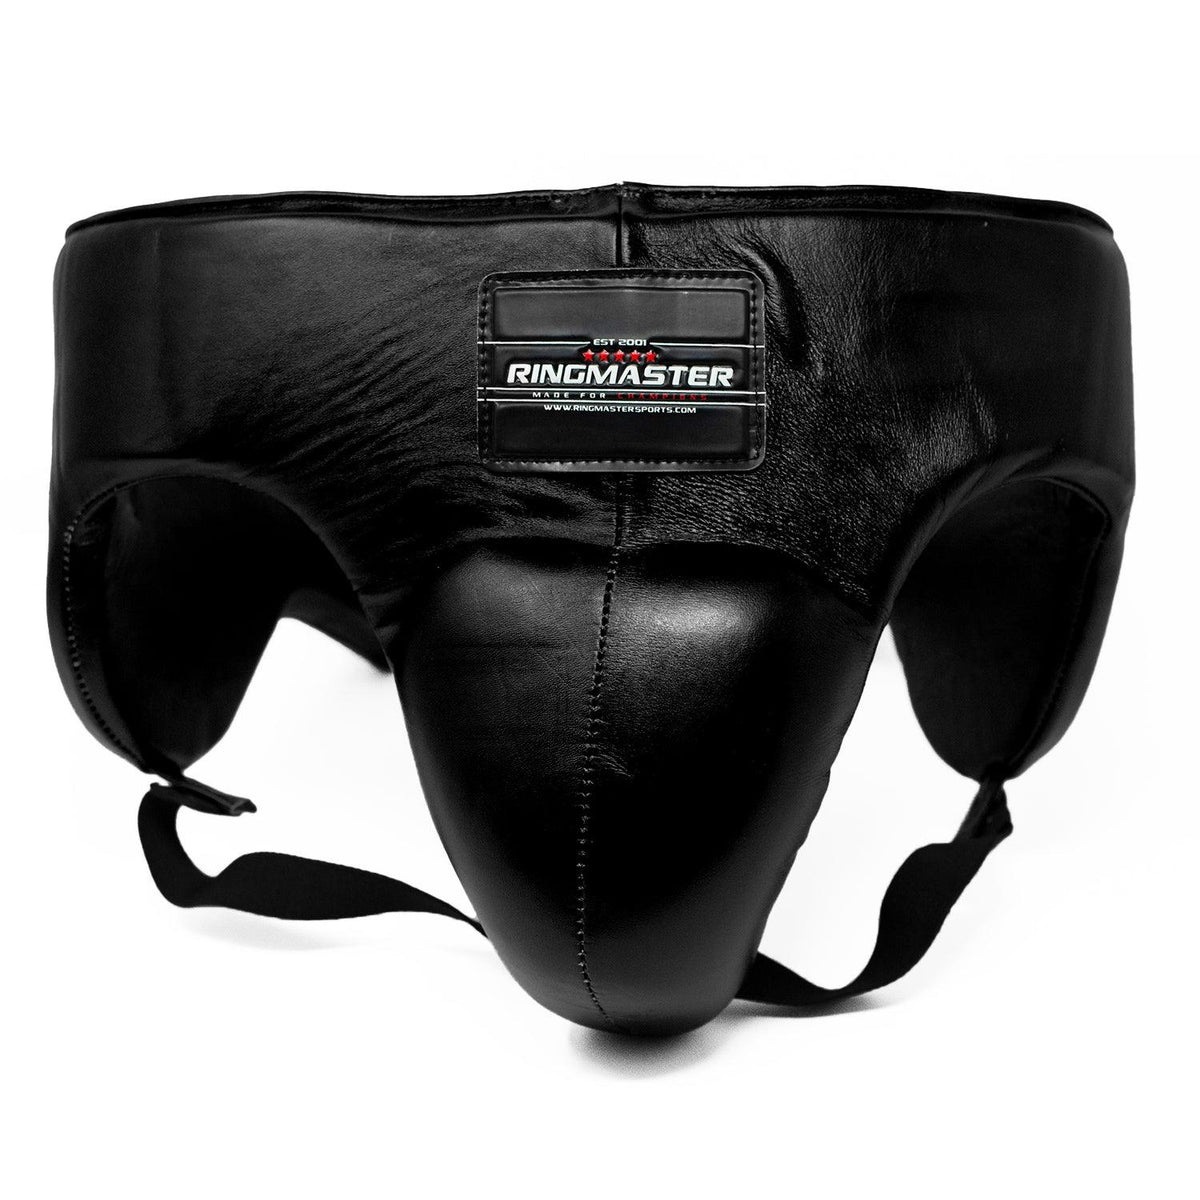 RingMaster Sports Pro 3.0 Groin Guard Genuine Leather Blue